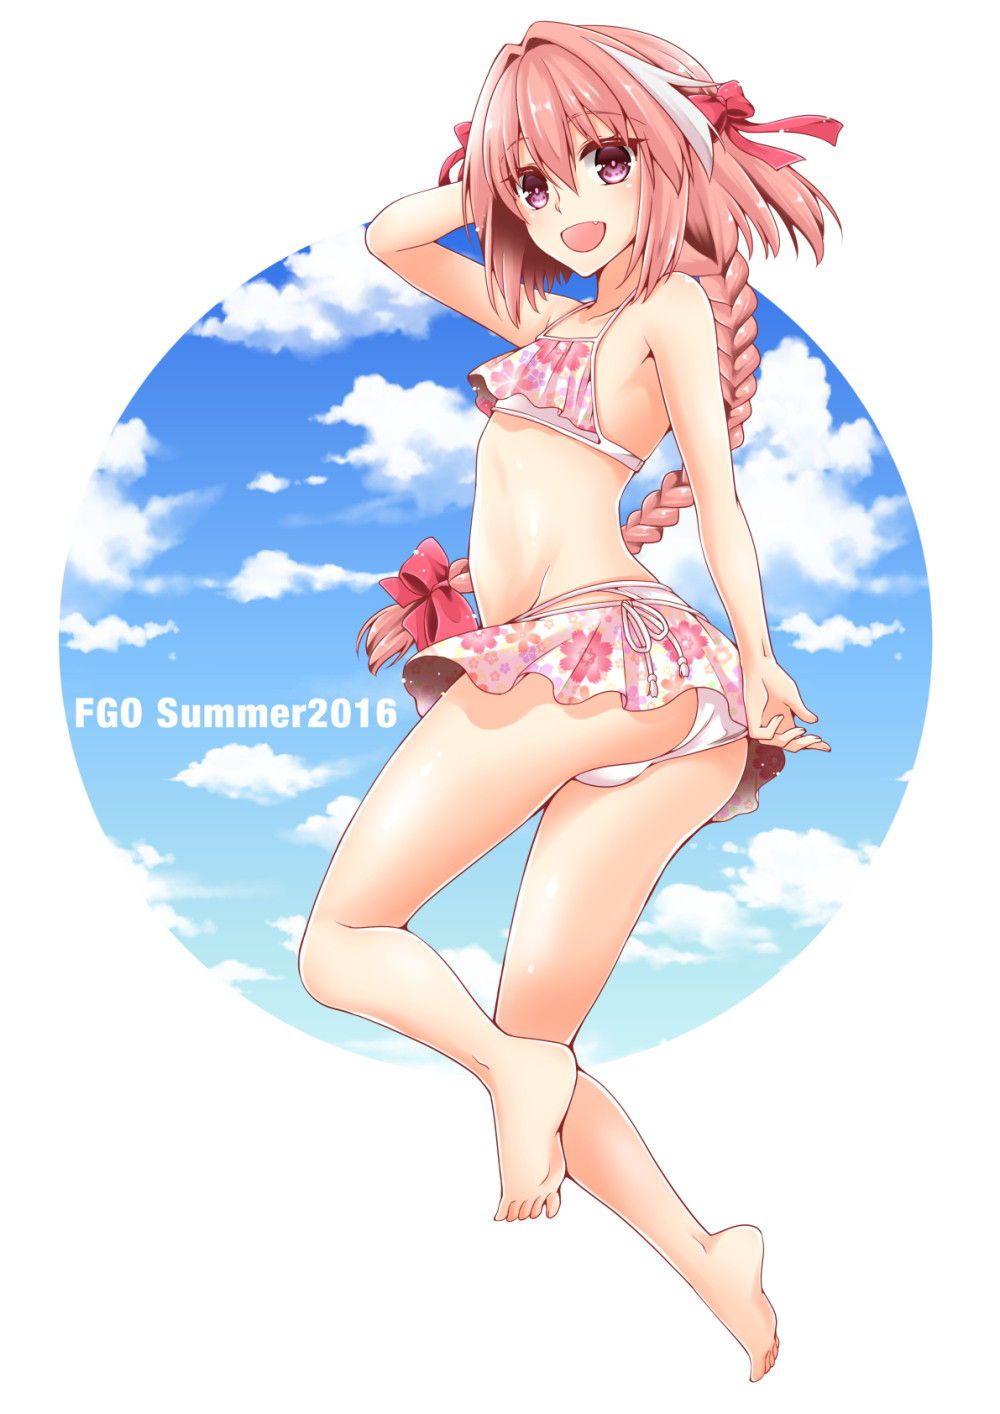 Fate Grand Order: Astorfo's cute picture furnace image summary 16